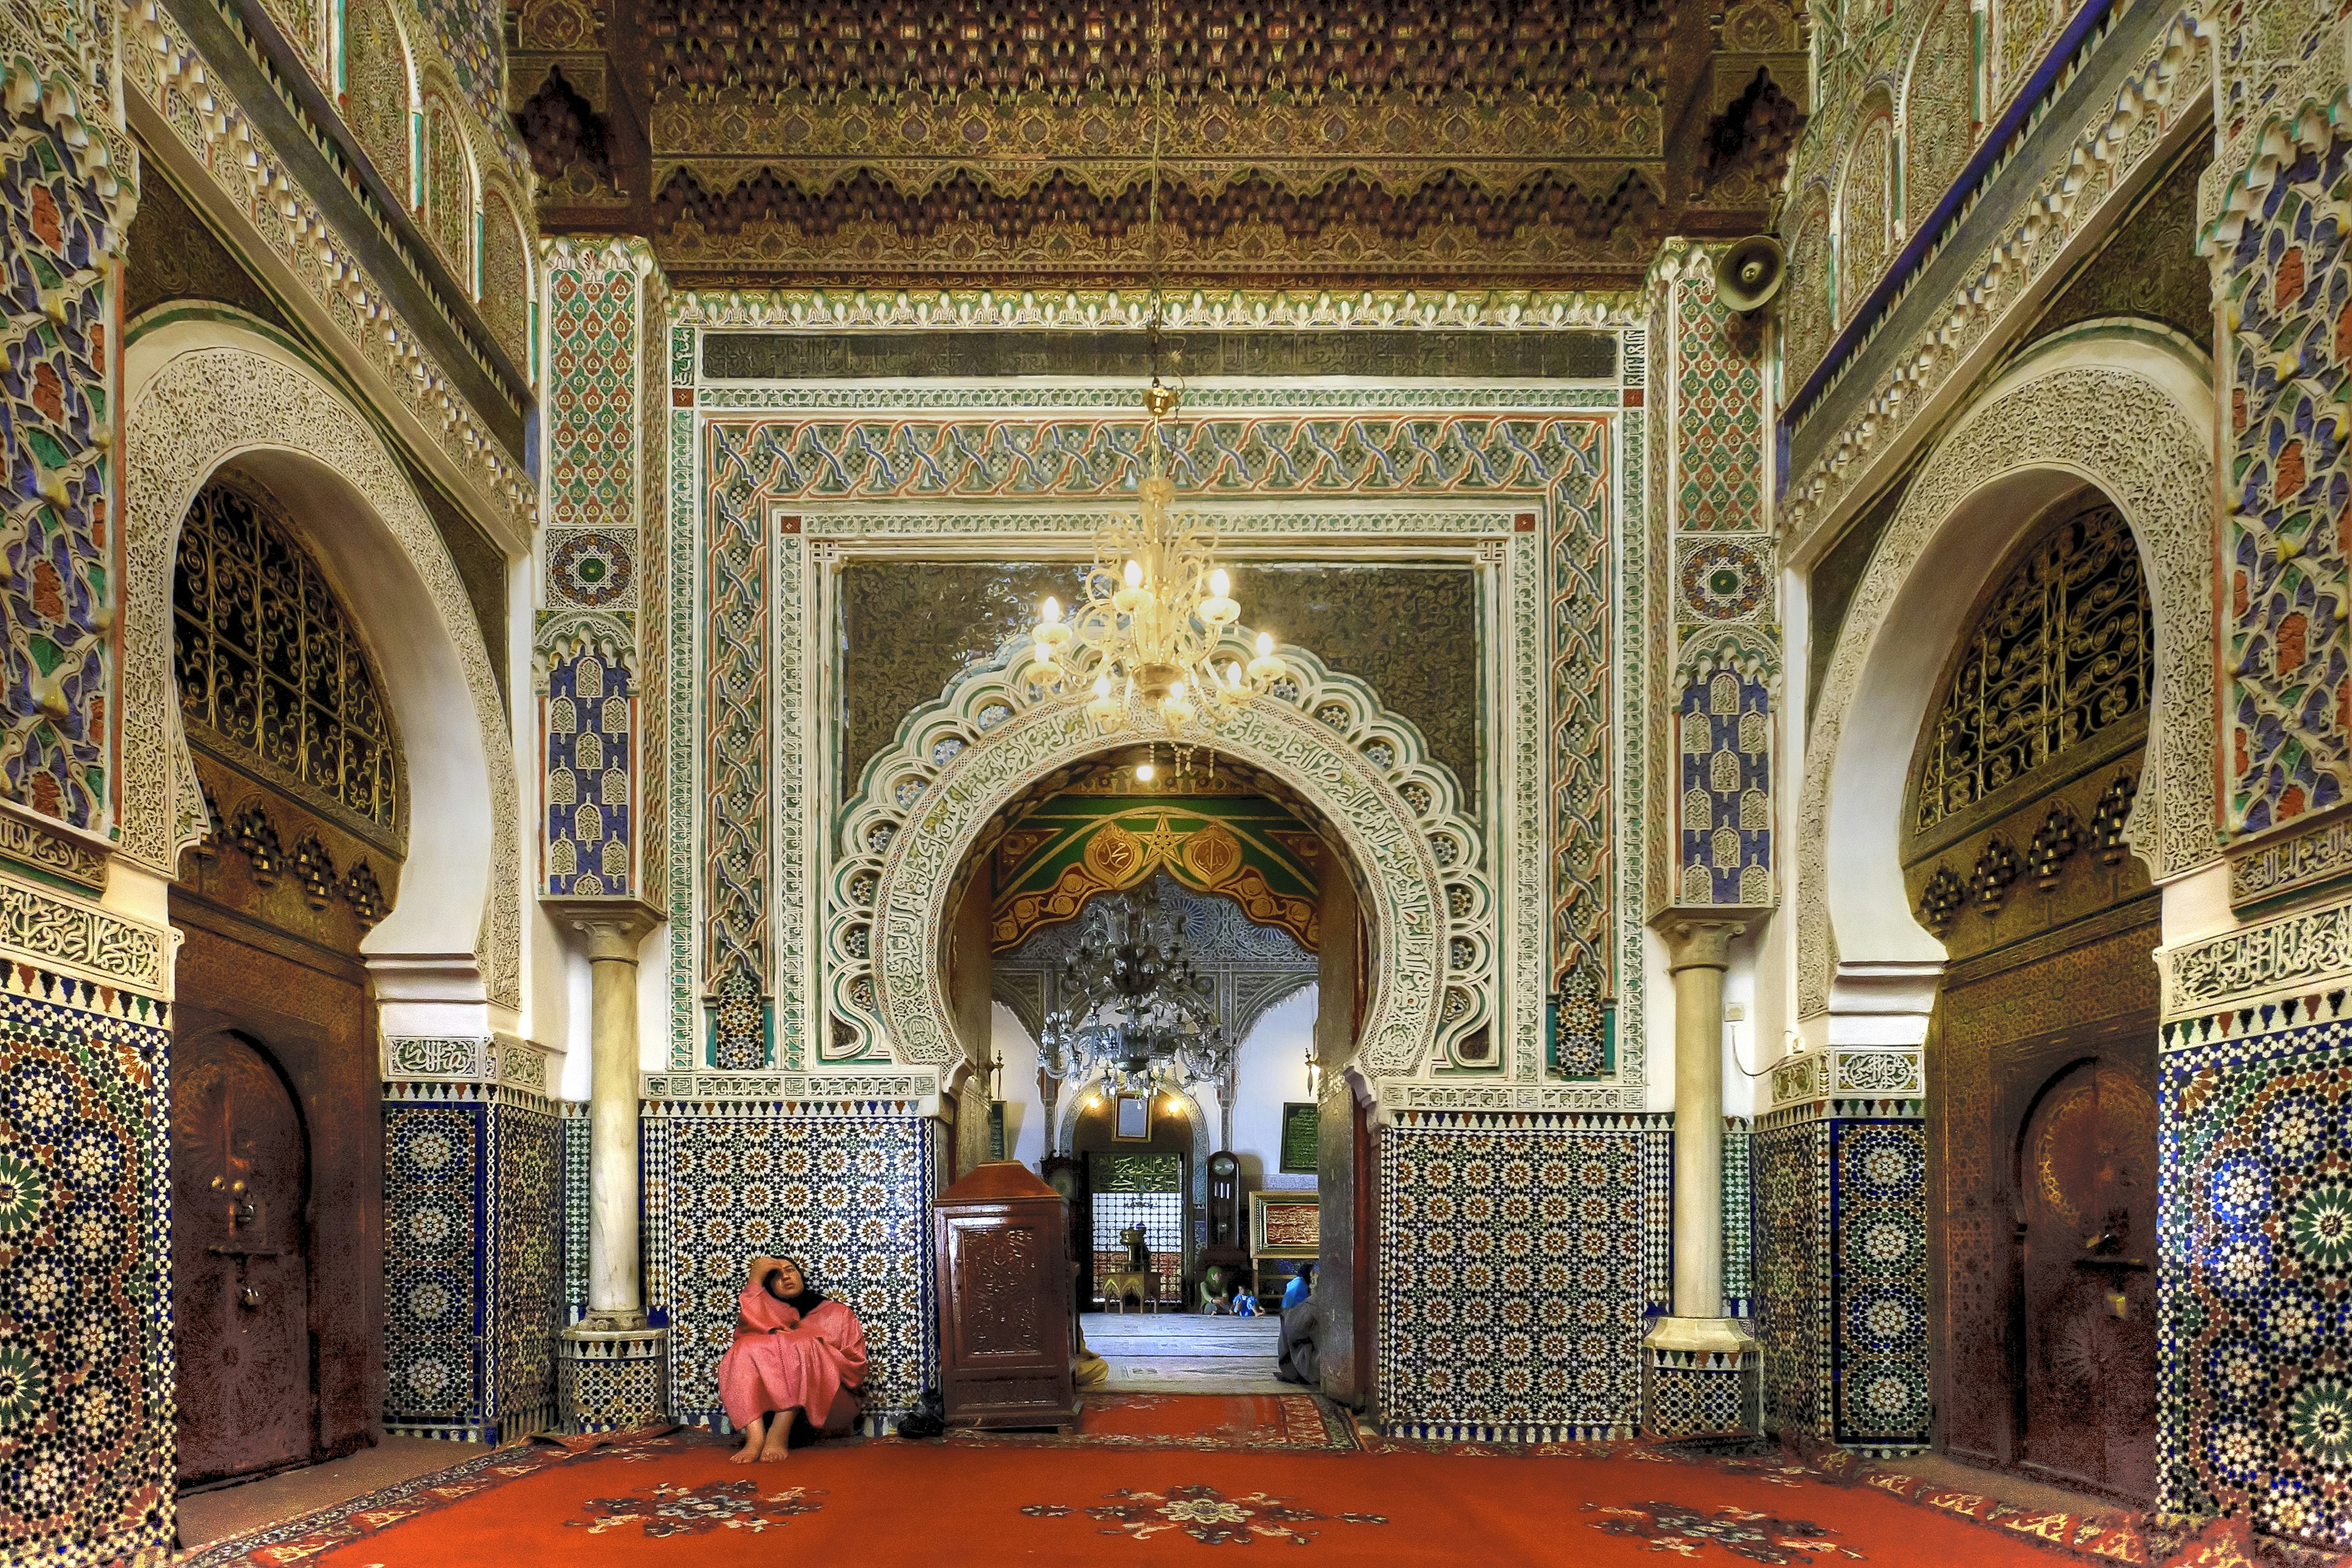 A woman in a long pink garment and black headscarf sits on the red-carpeted floor, touching her forehead, surrounded by the intricate mosaics and round, arched doors in the elaborate Mausoleum of Moulay 